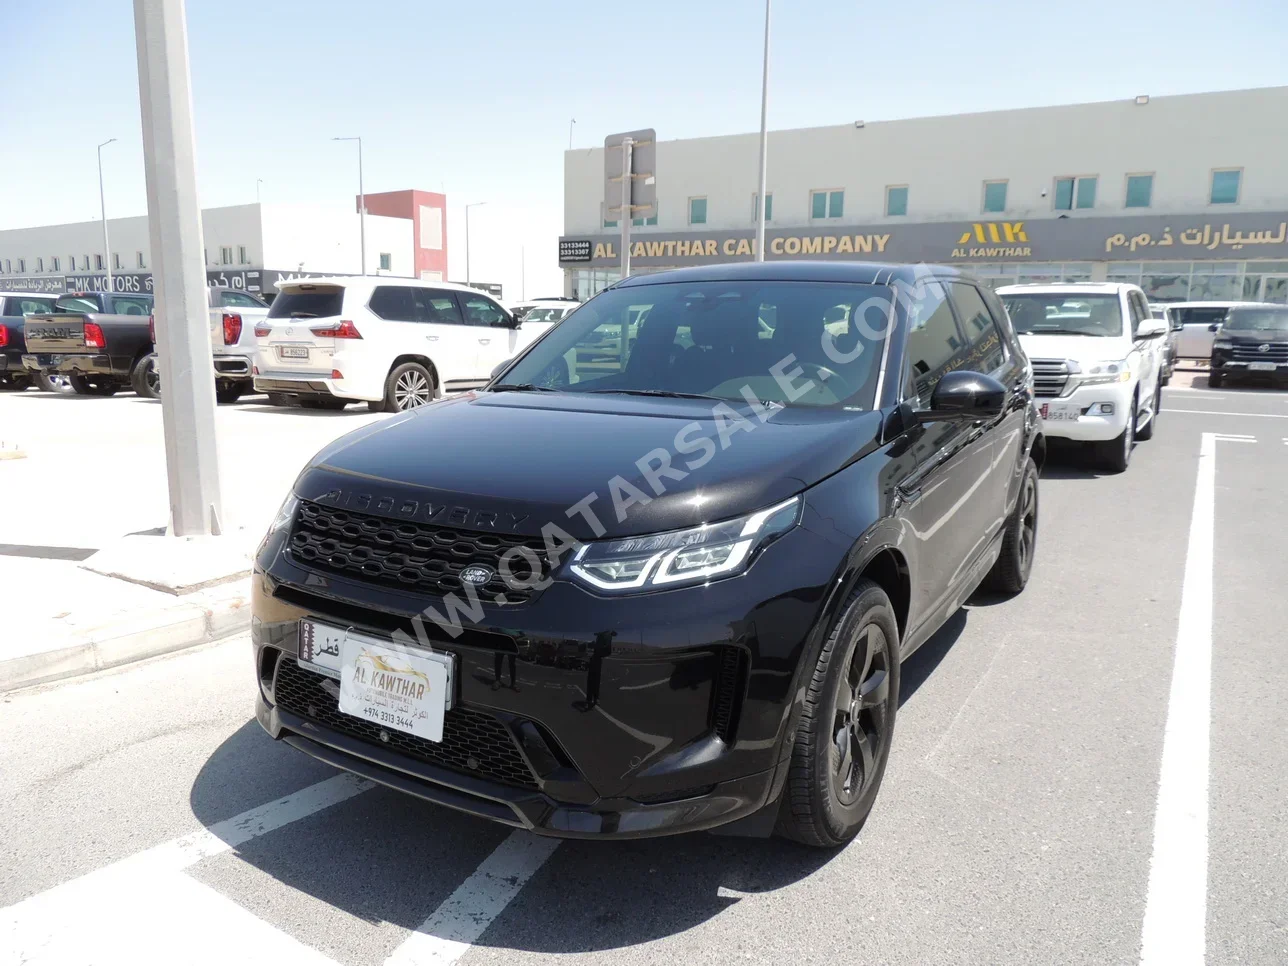 Land Rover  Discovery  Sport  2021  Automatic  14,000 Km  4 Cylinder  All Wheel Drive (AWD)  SUV  Black  With Warranty